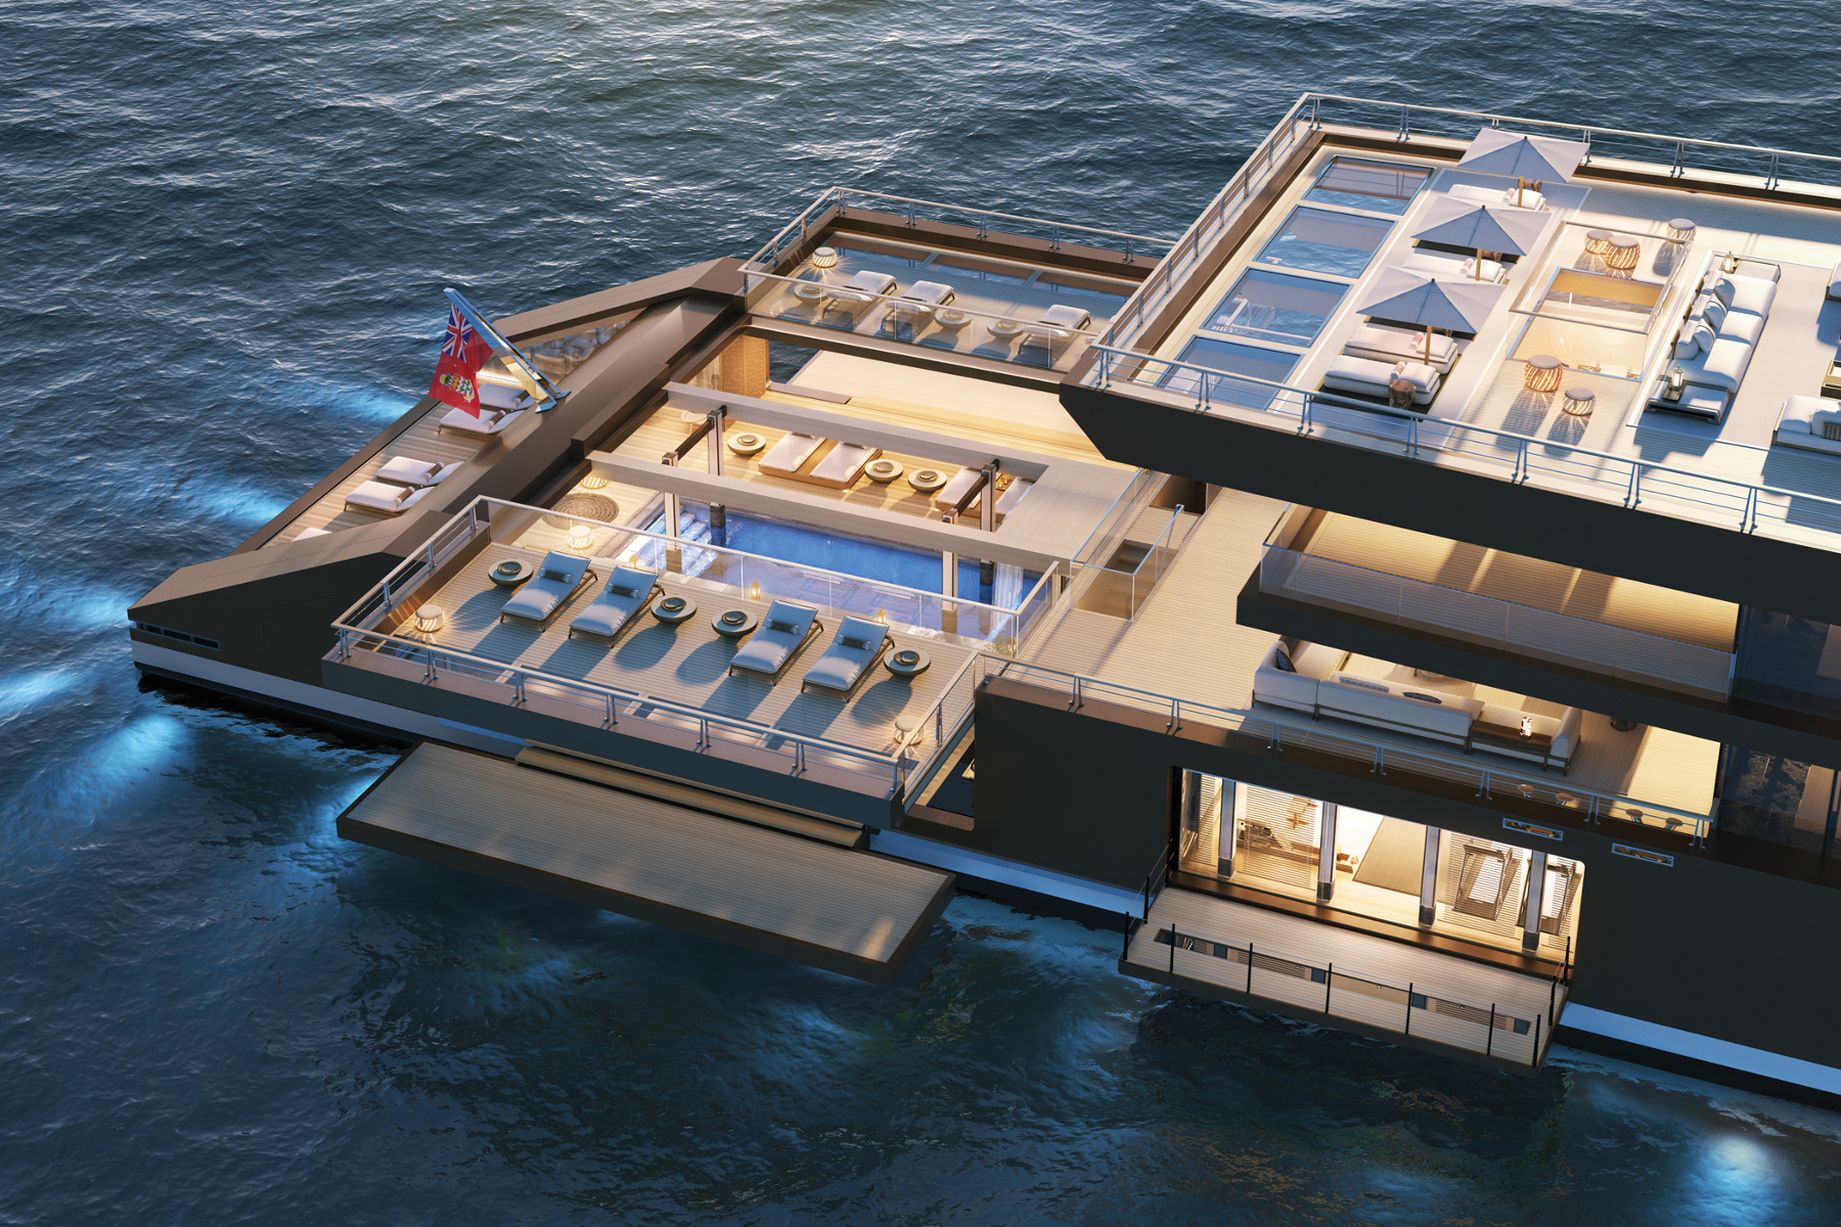 See inside the stunning 400ft superyacht with VIP suites, gym ...